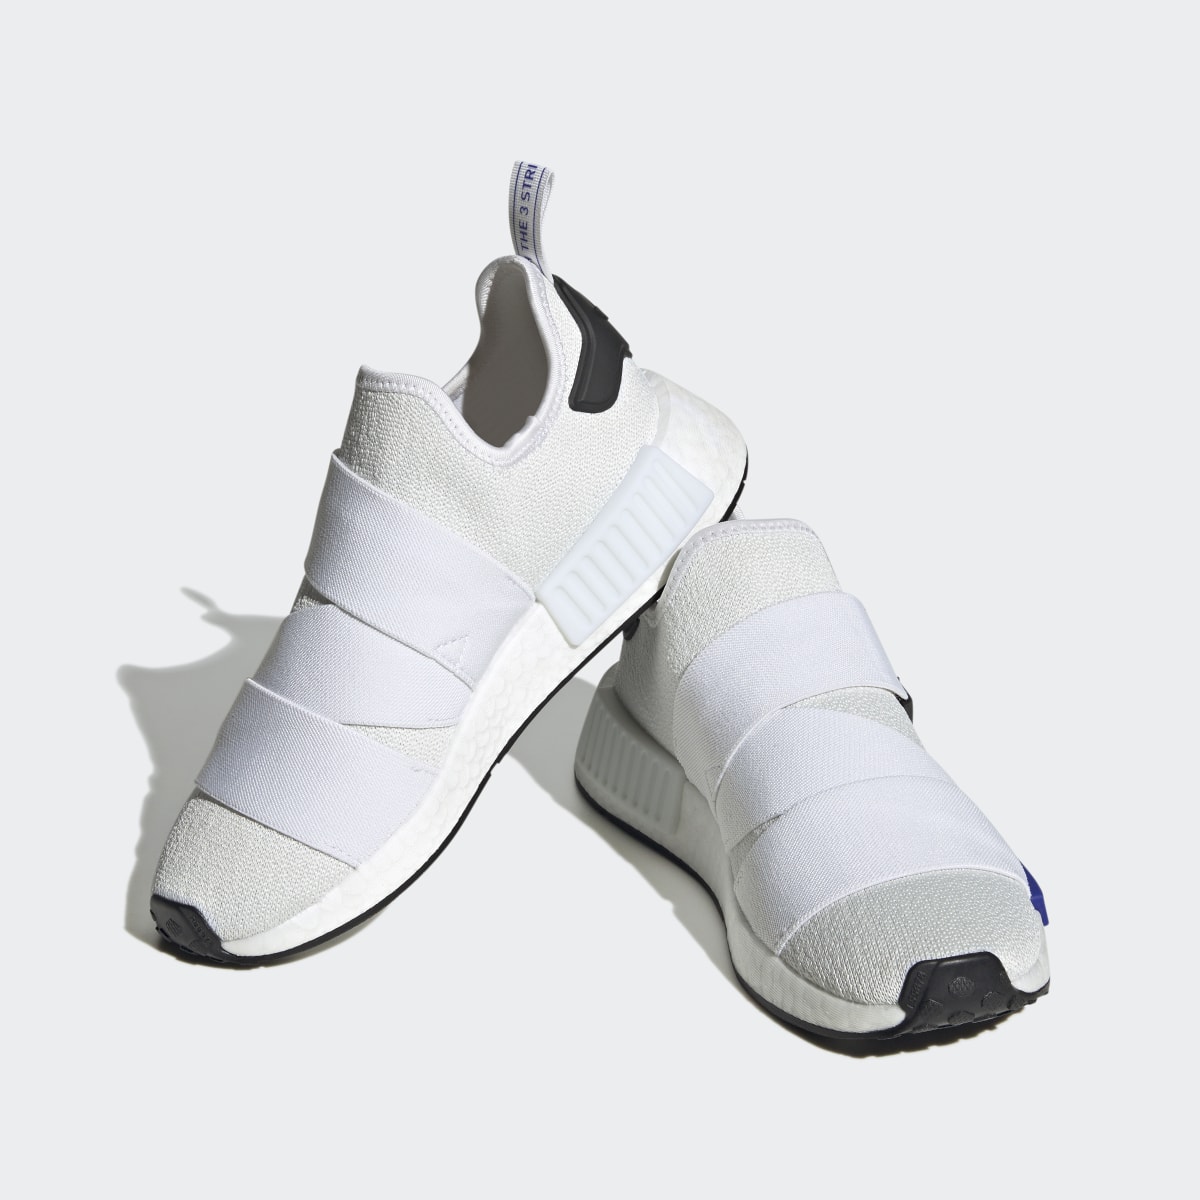 Adidas NMD_R1 Strap Shoes. 5